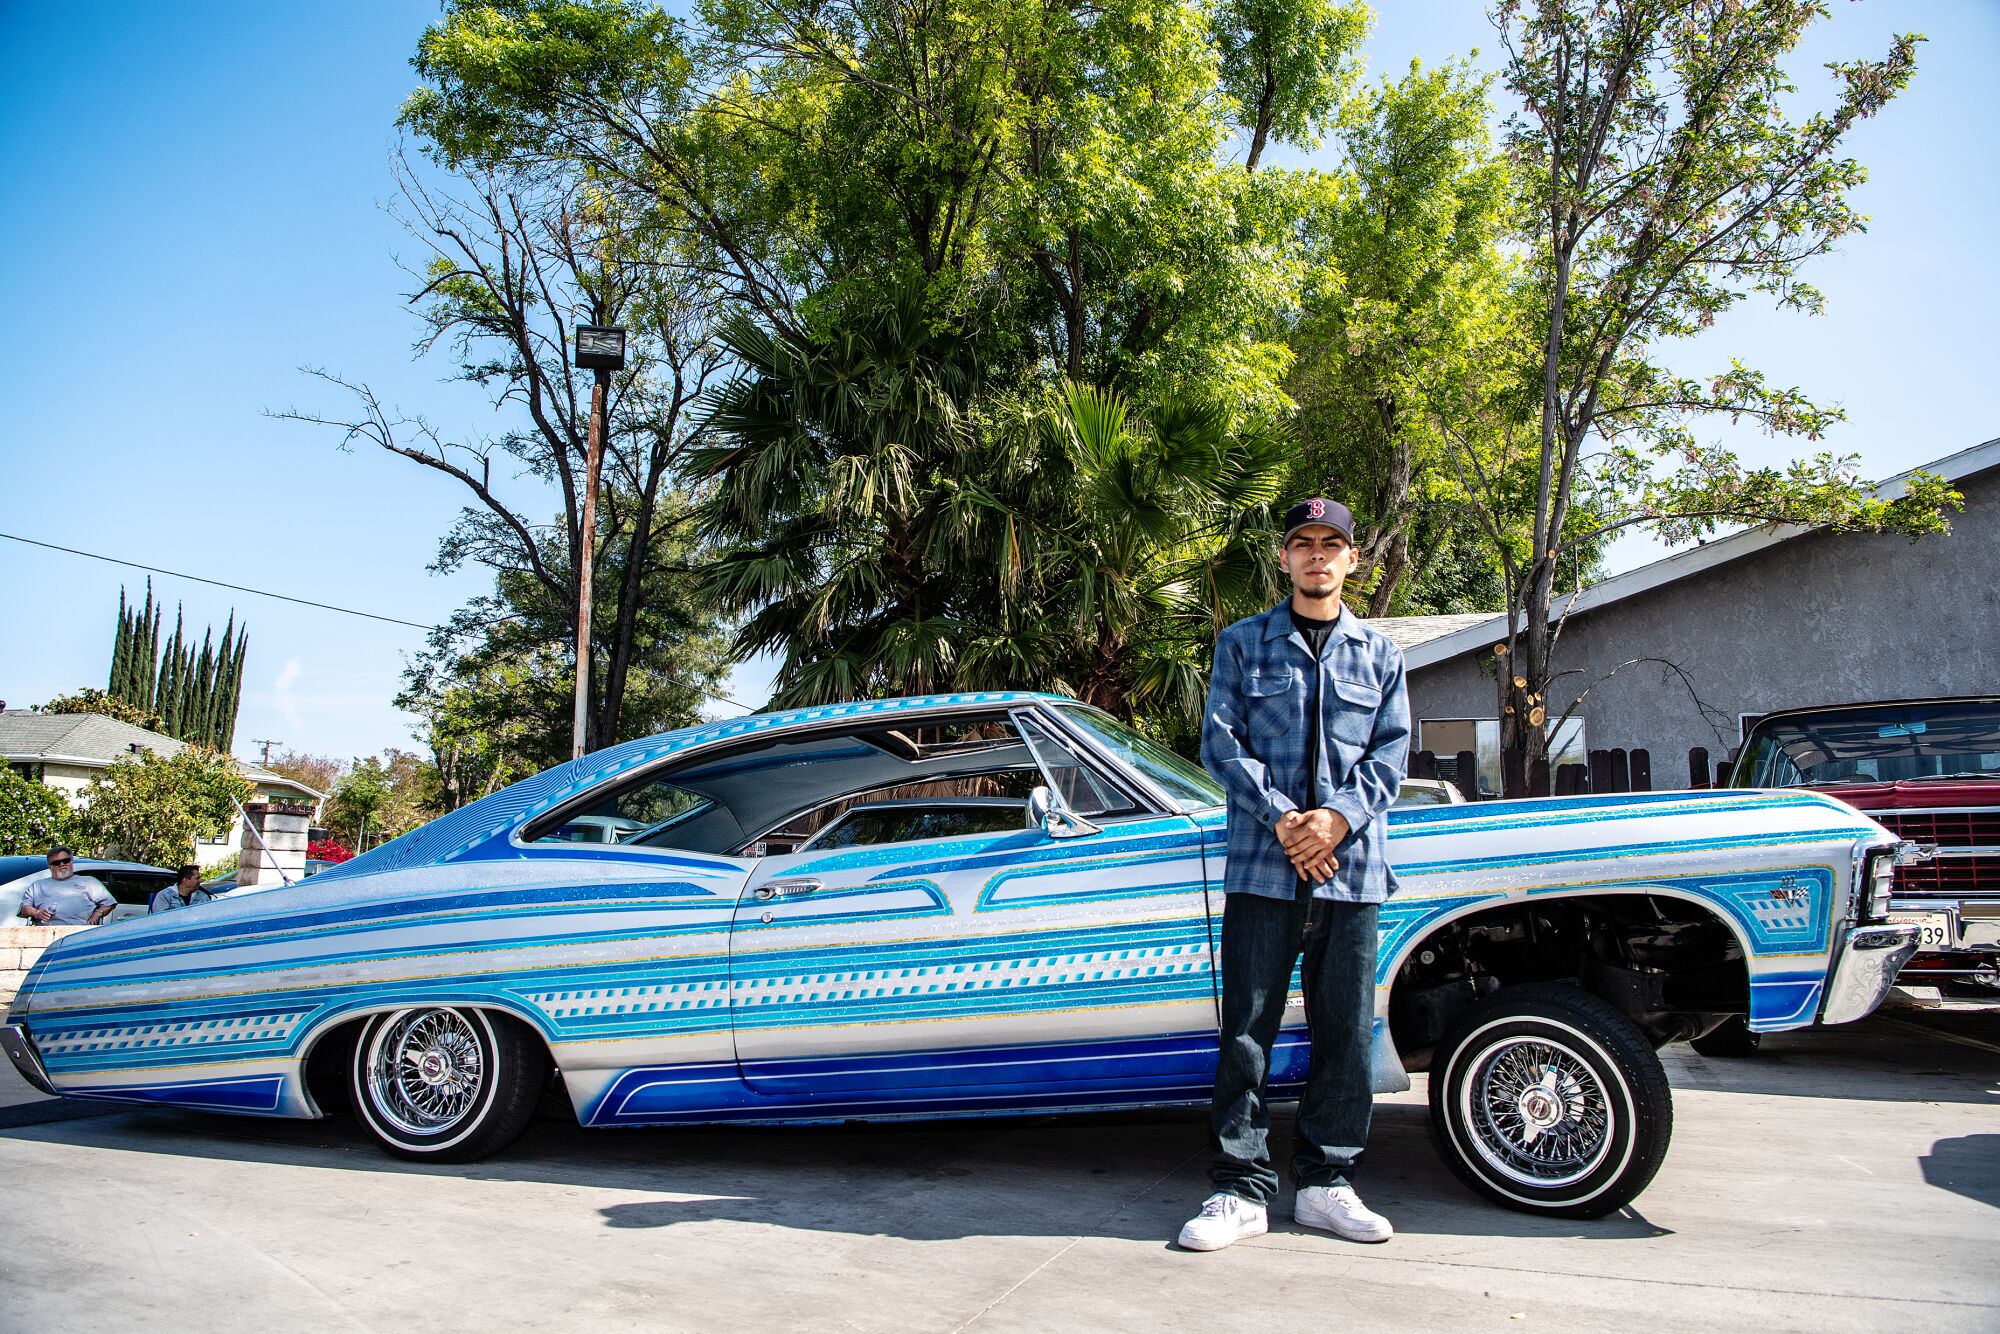 Victor Martinez poses in front of a 1967 Chevrolet Impala.